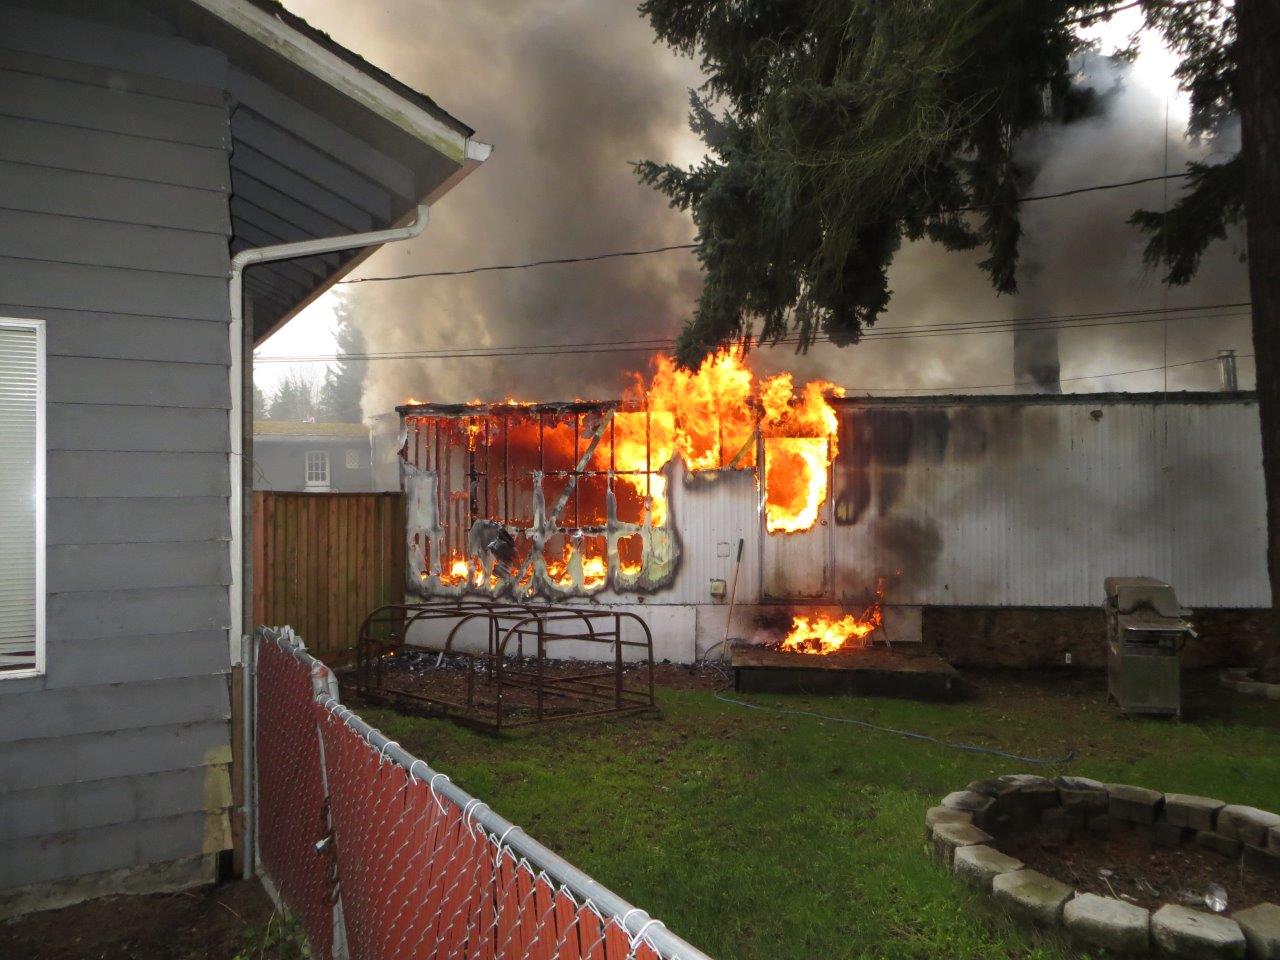 The mobile home in flames before firefighters arrive this afternoon. (Douglas Atterbury)